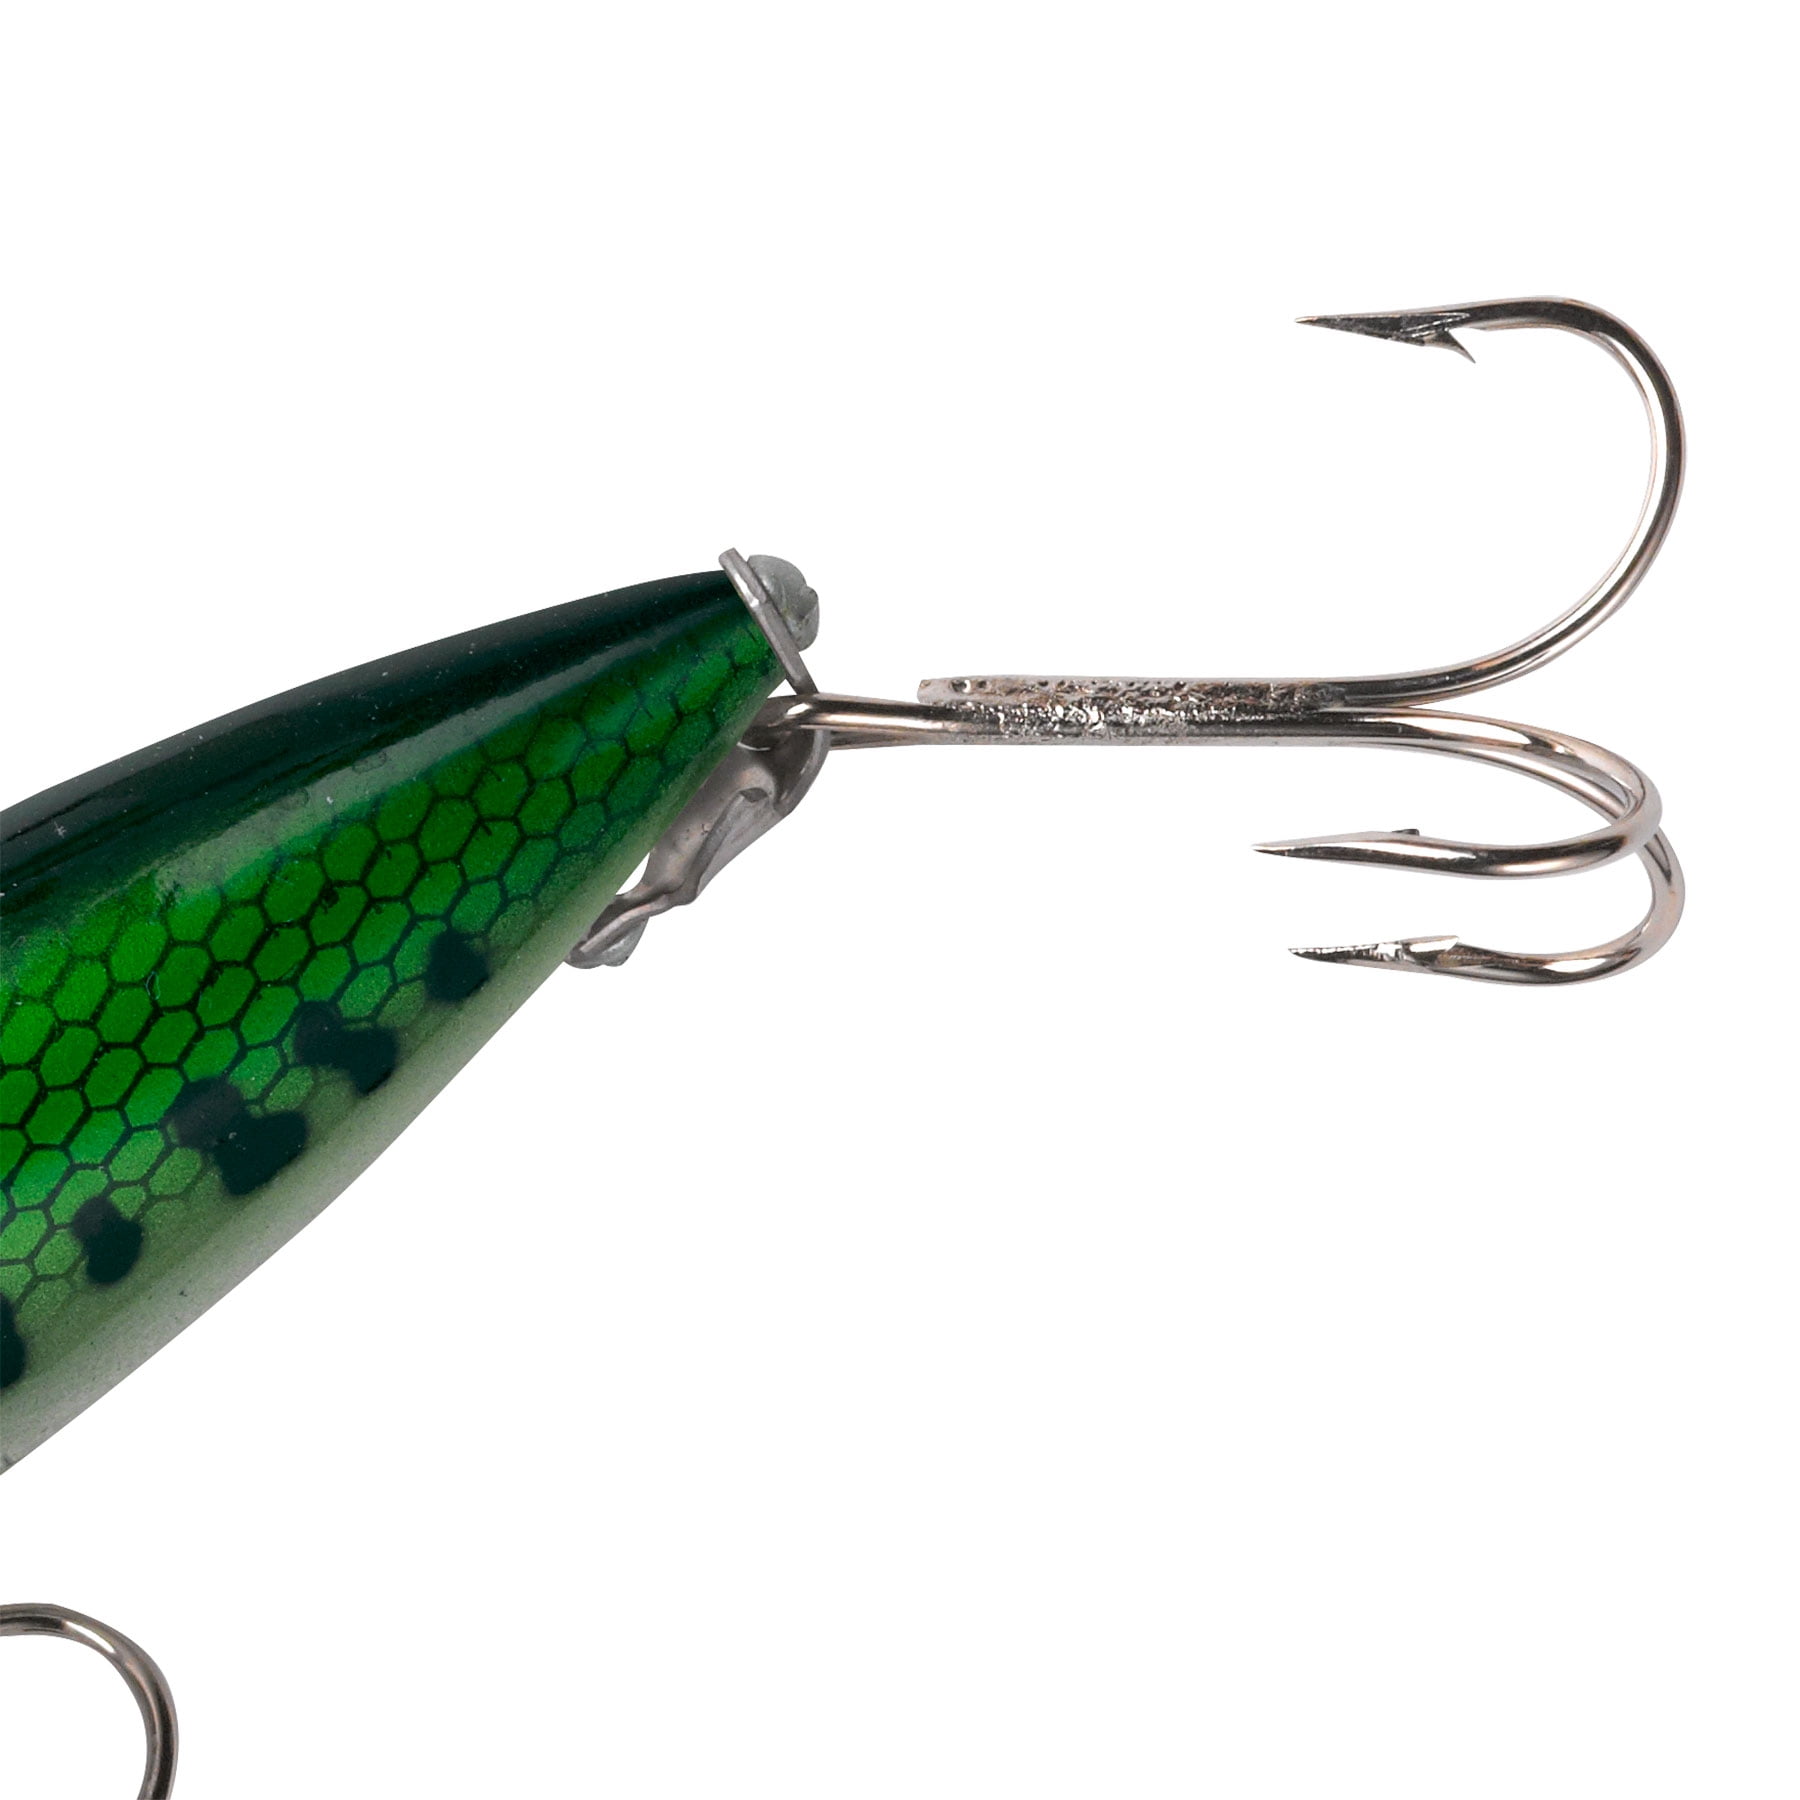 Hansen Stripper SD 6,9 cm 12 g Sinking, Sea Trout Lures, Lures and Baits, Spin Fishing